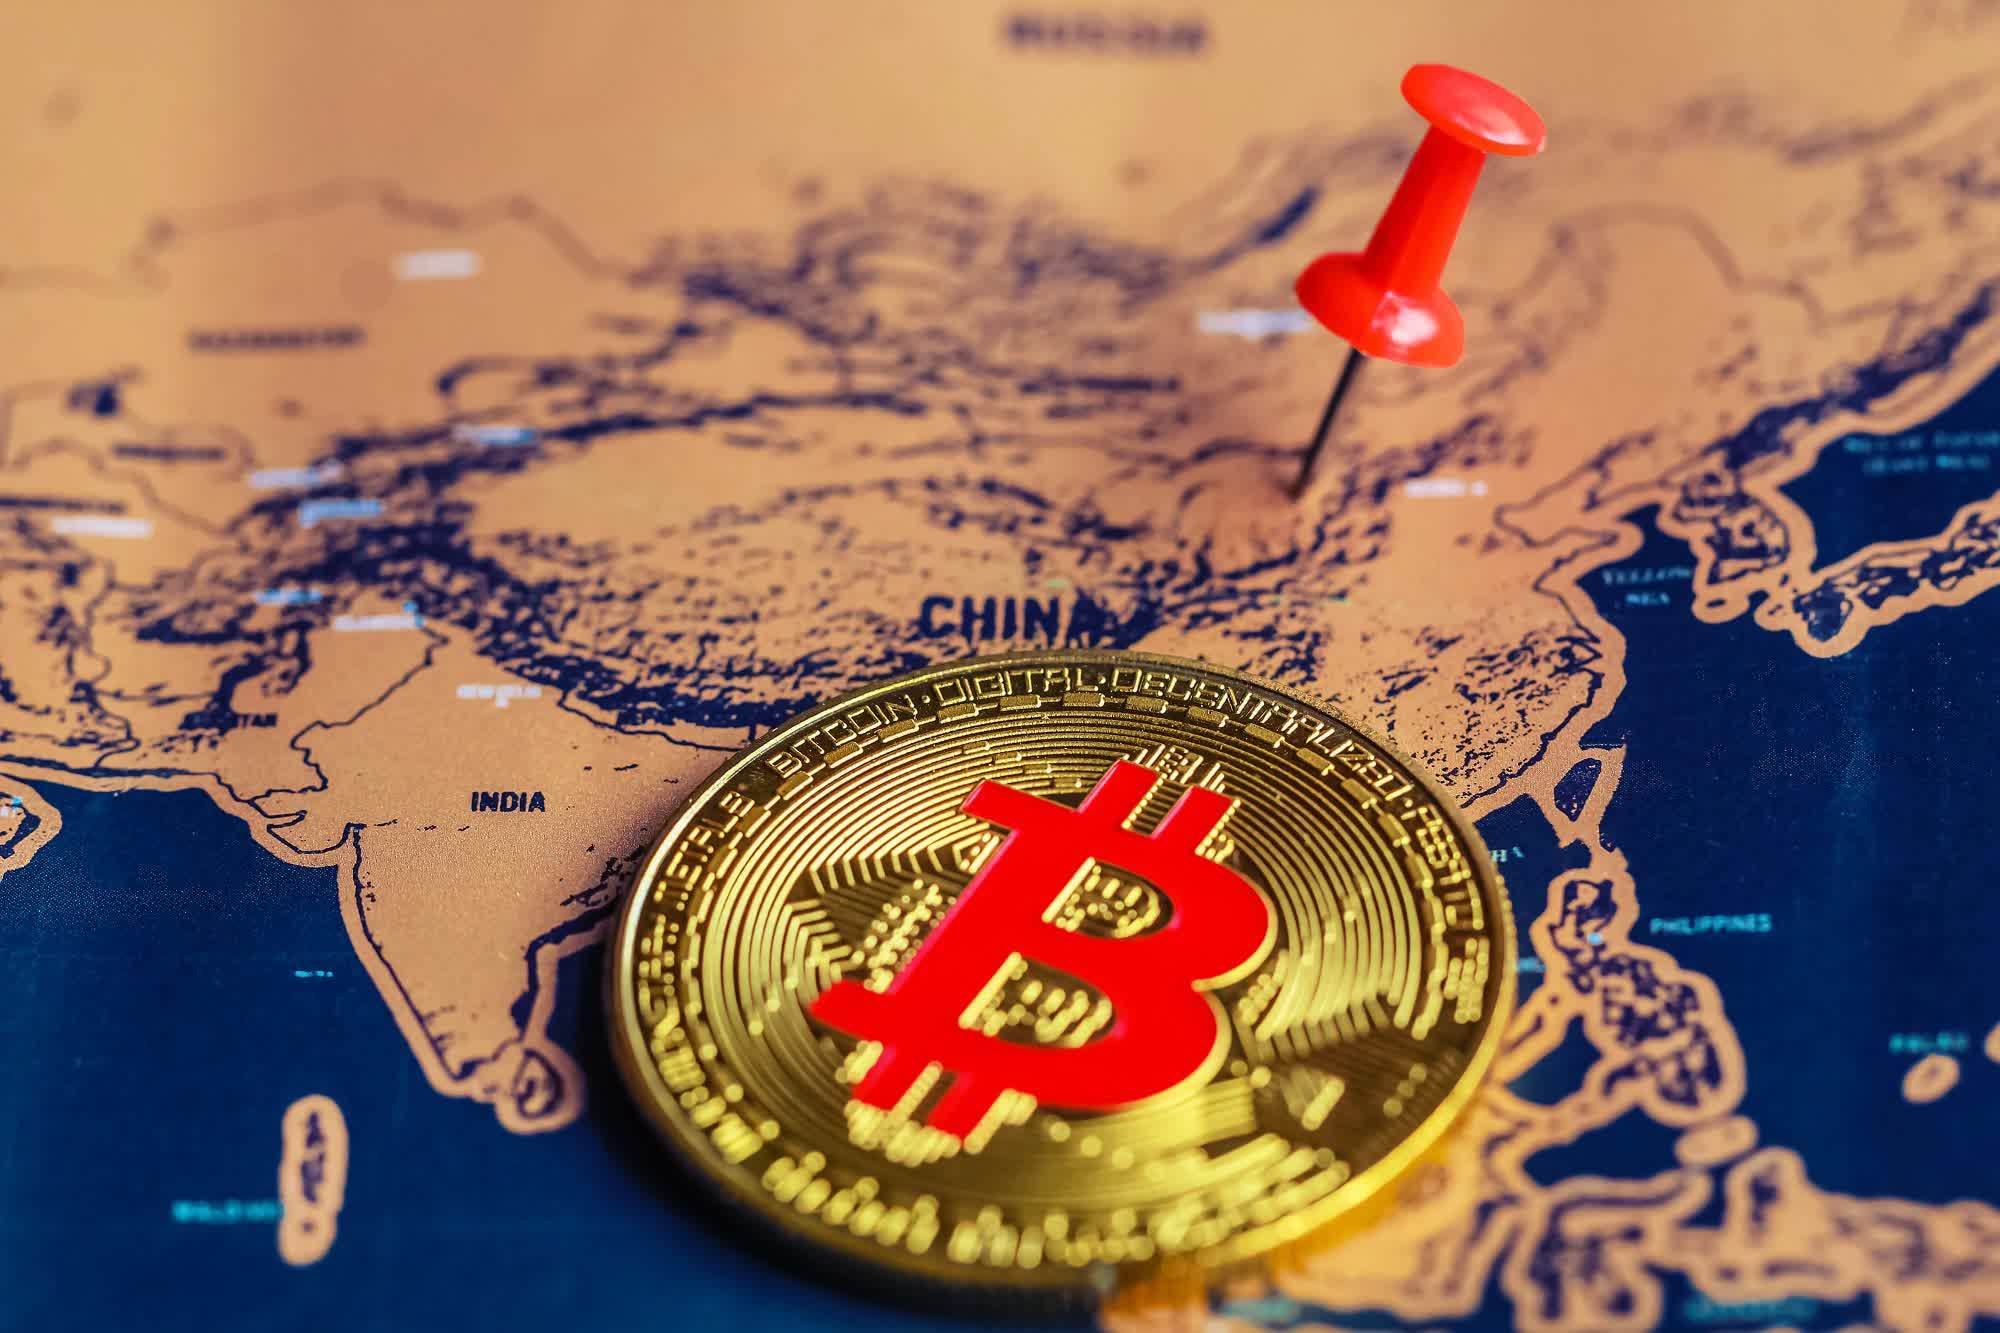 GPU prices see sharp drop in China after Sichuan authorities shut down cryptomining operations